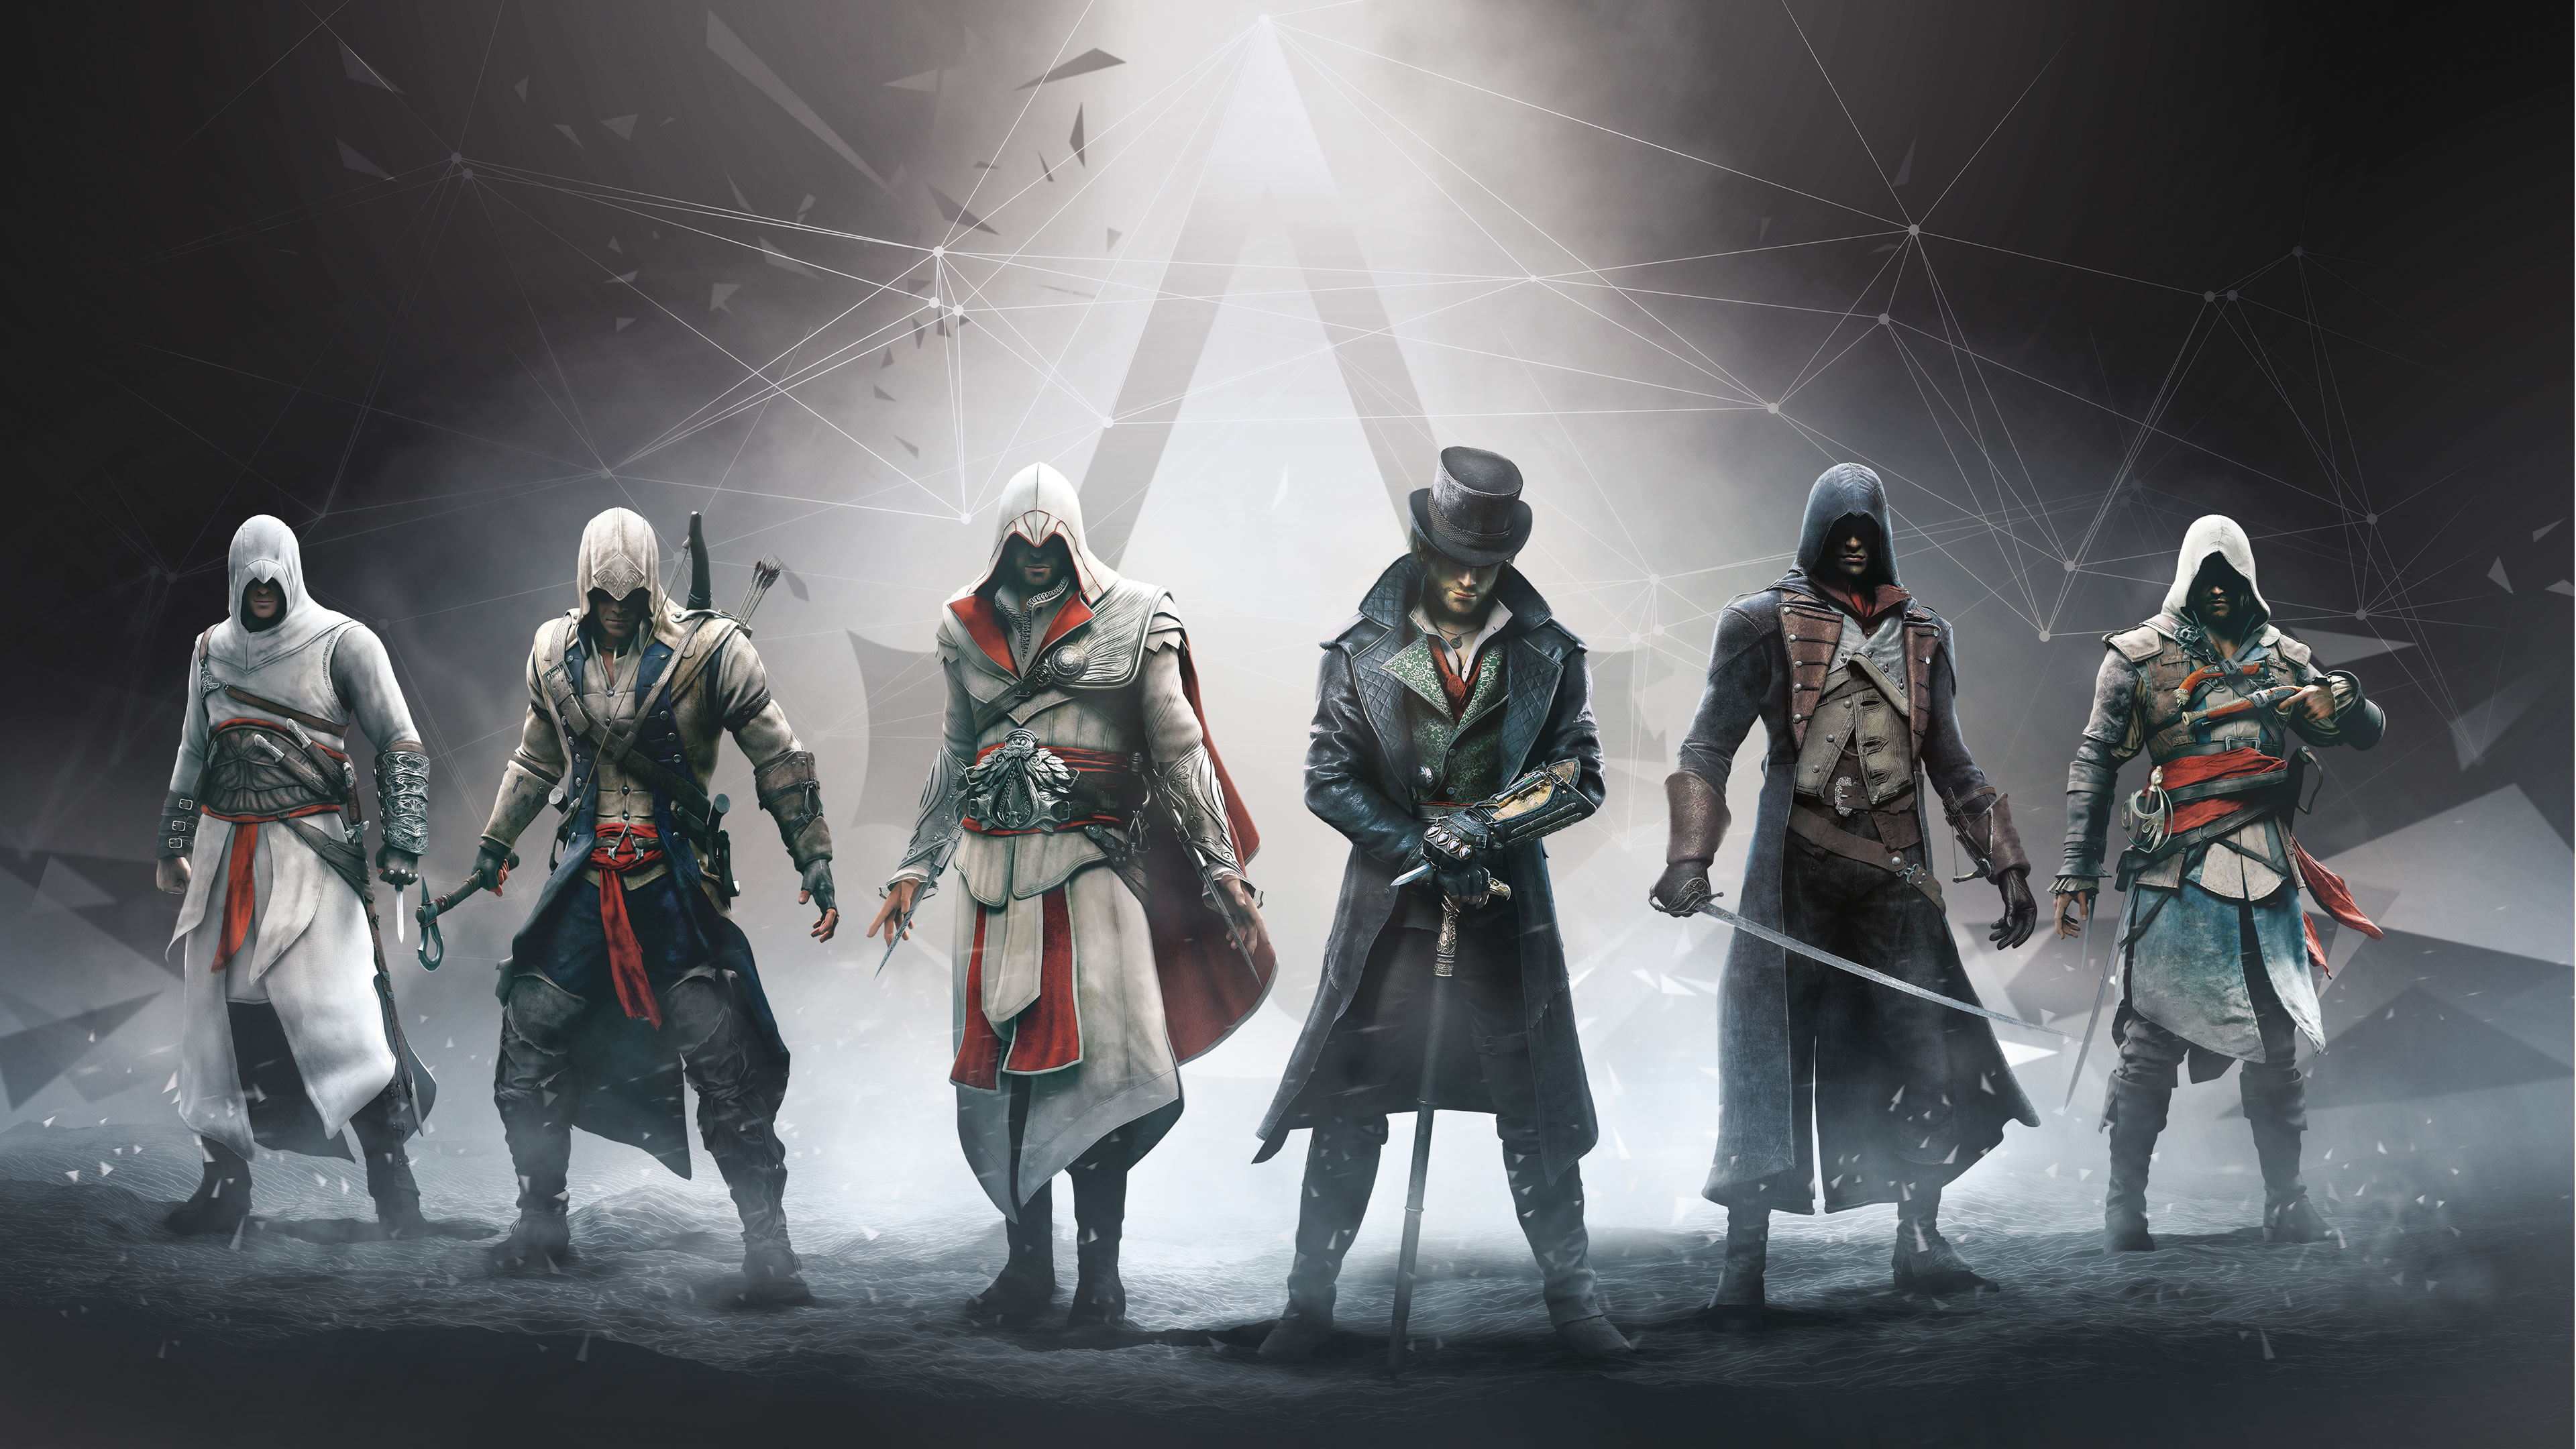 ezio (assassin's creed), assassin's creed, altair (assassin's creed), video game, edward kenway, connor (assassin's creed), arno dorian, jacob frye